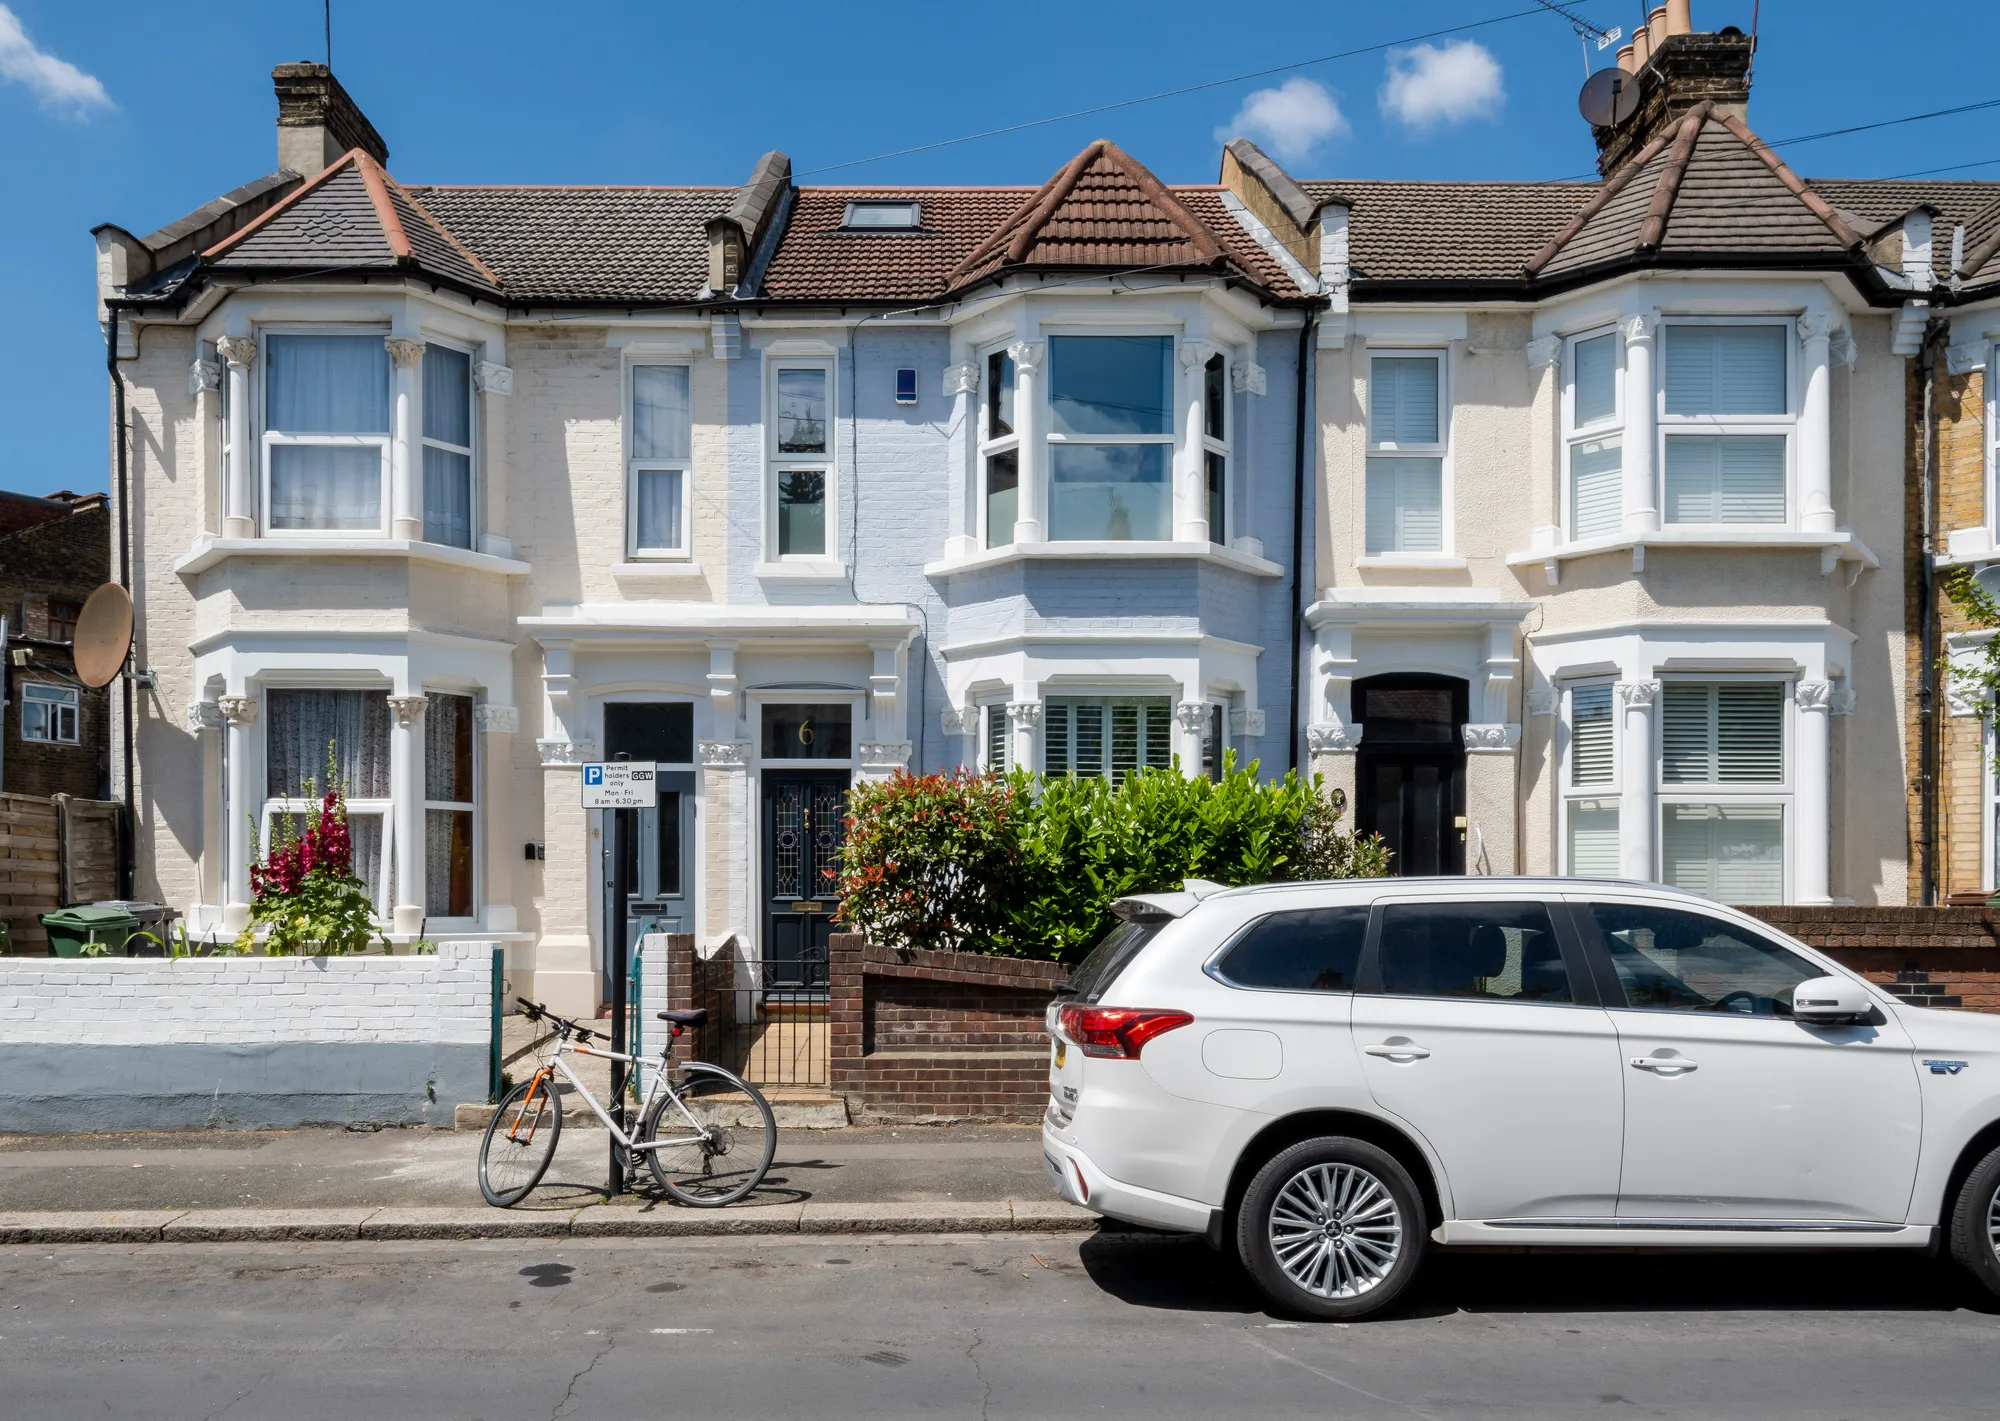 5 bed mid-terraced house for sale in Tyndall Road, Leyton - Property Image 1